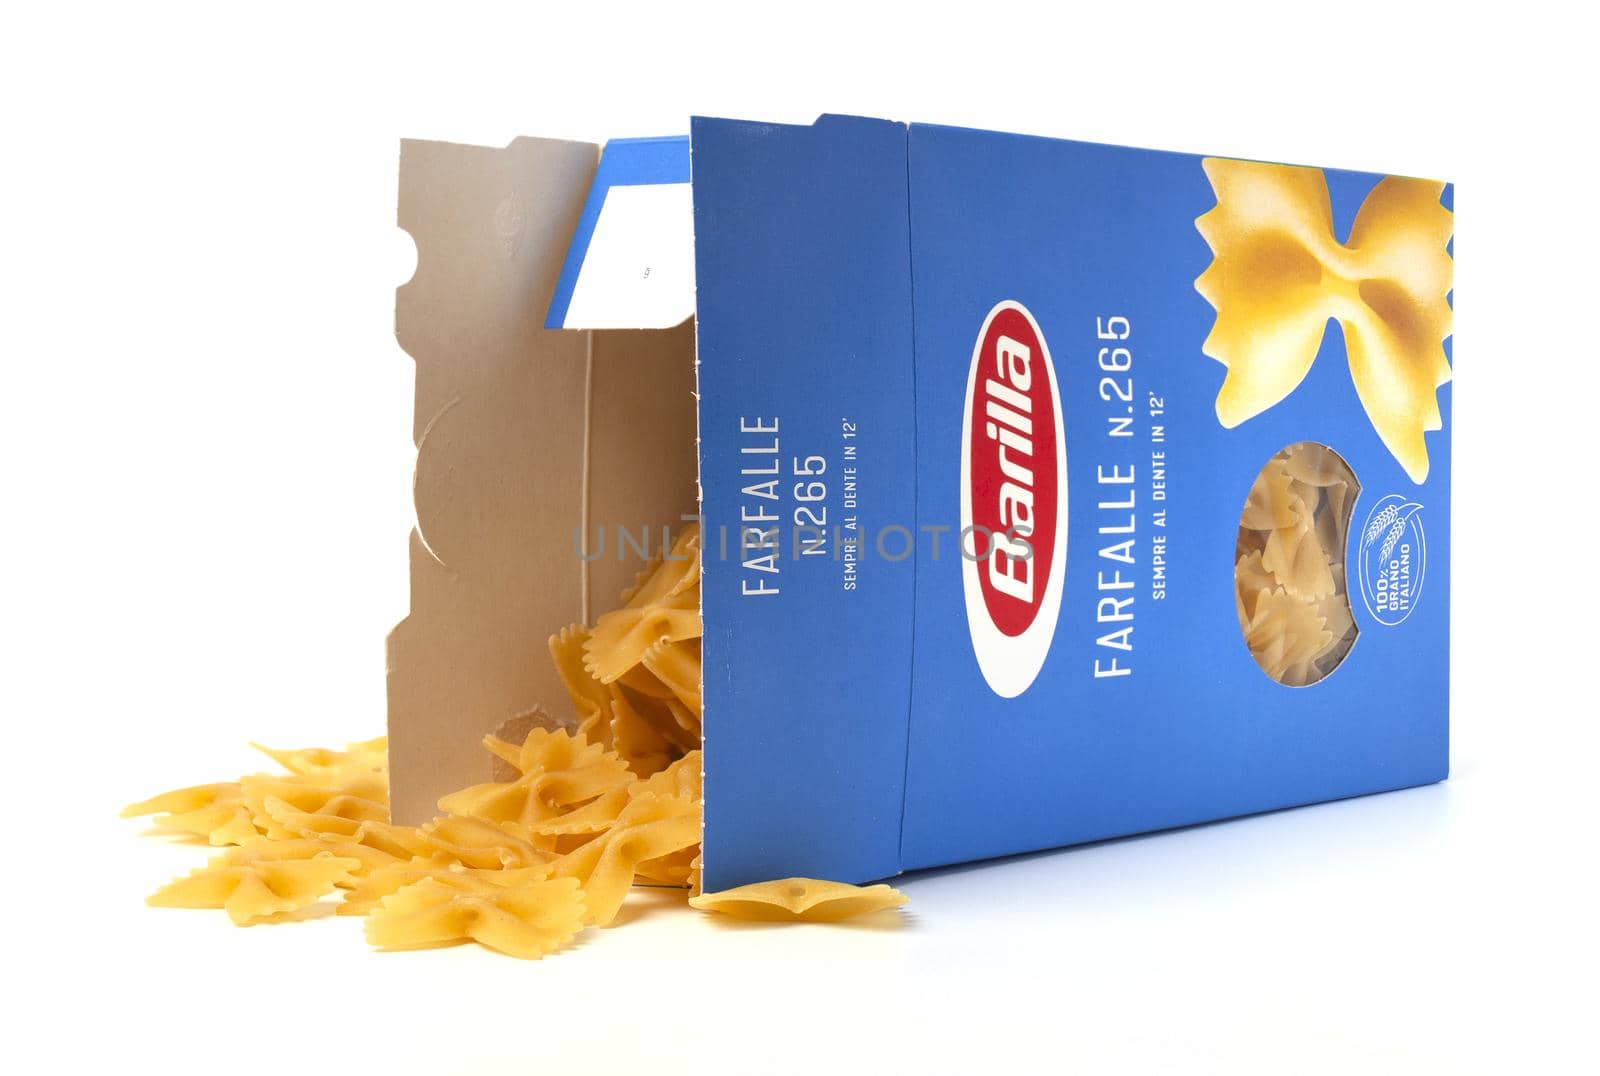 Barilla Farfalle Nr 265. Italian pasta in a box isolated on white by SlayCer